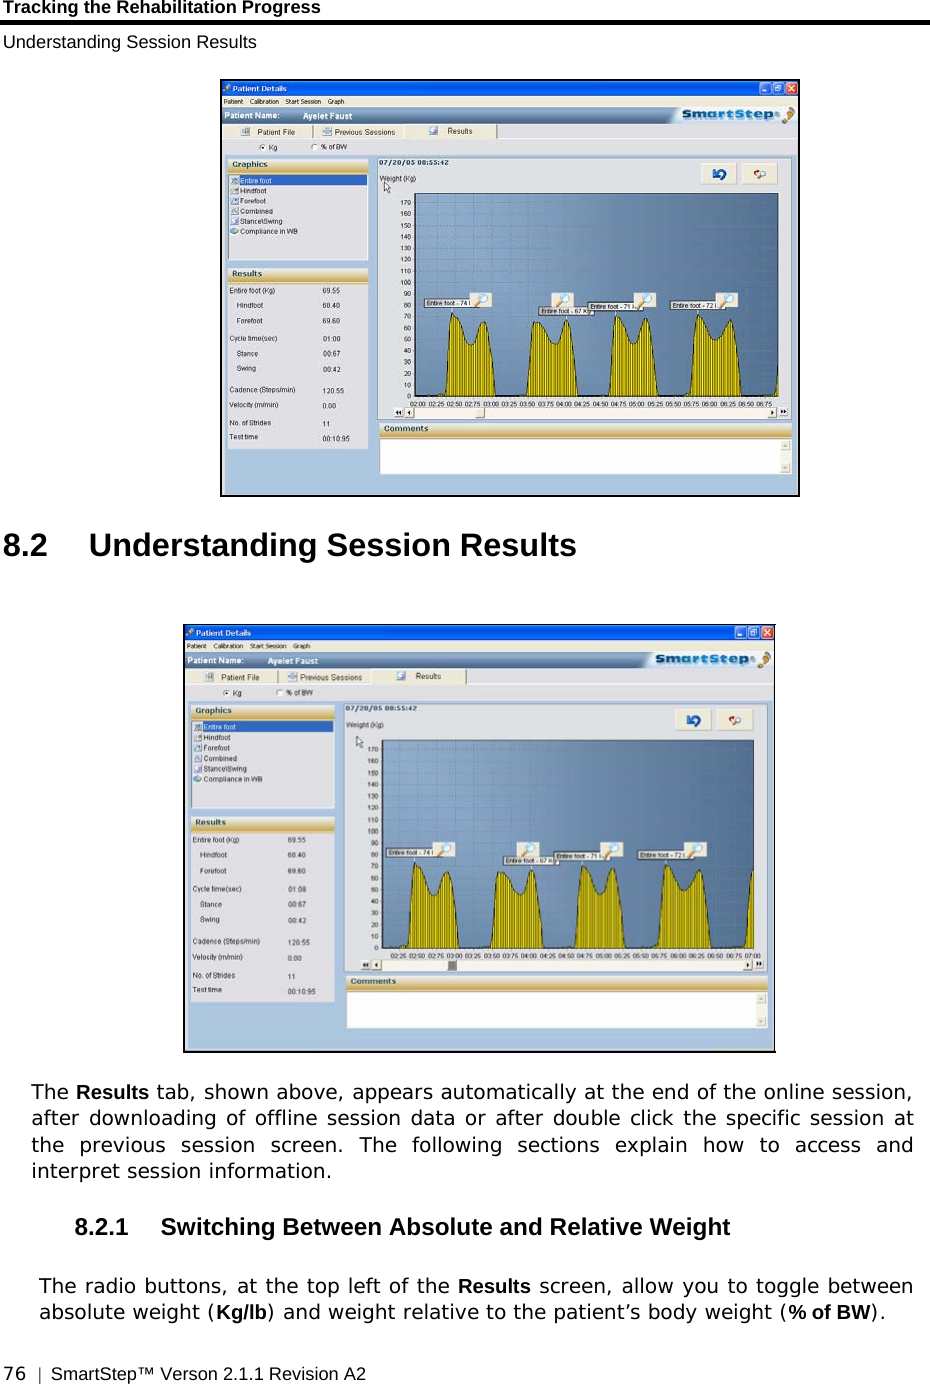 Tracking the Rehabilitation Progress Understanding Session Results  76  |  SmartStep™ Verson 2.1.1 Revision A2    8.2 Understanding Session Results   The Results tab, shown above, appears automatically at the end of the online session, after downloading of offline session data or after double click the specific session at the previous session screen. The following sections explain how to access and interpret session information. 8.2.1  Switching Between Absolute and Relative Weight The radio buttons, at the top left of the Results screen, allow you to toggle between absolute weight (Kg/lb) and weight relative to the patient’s body weight (% of BW).   